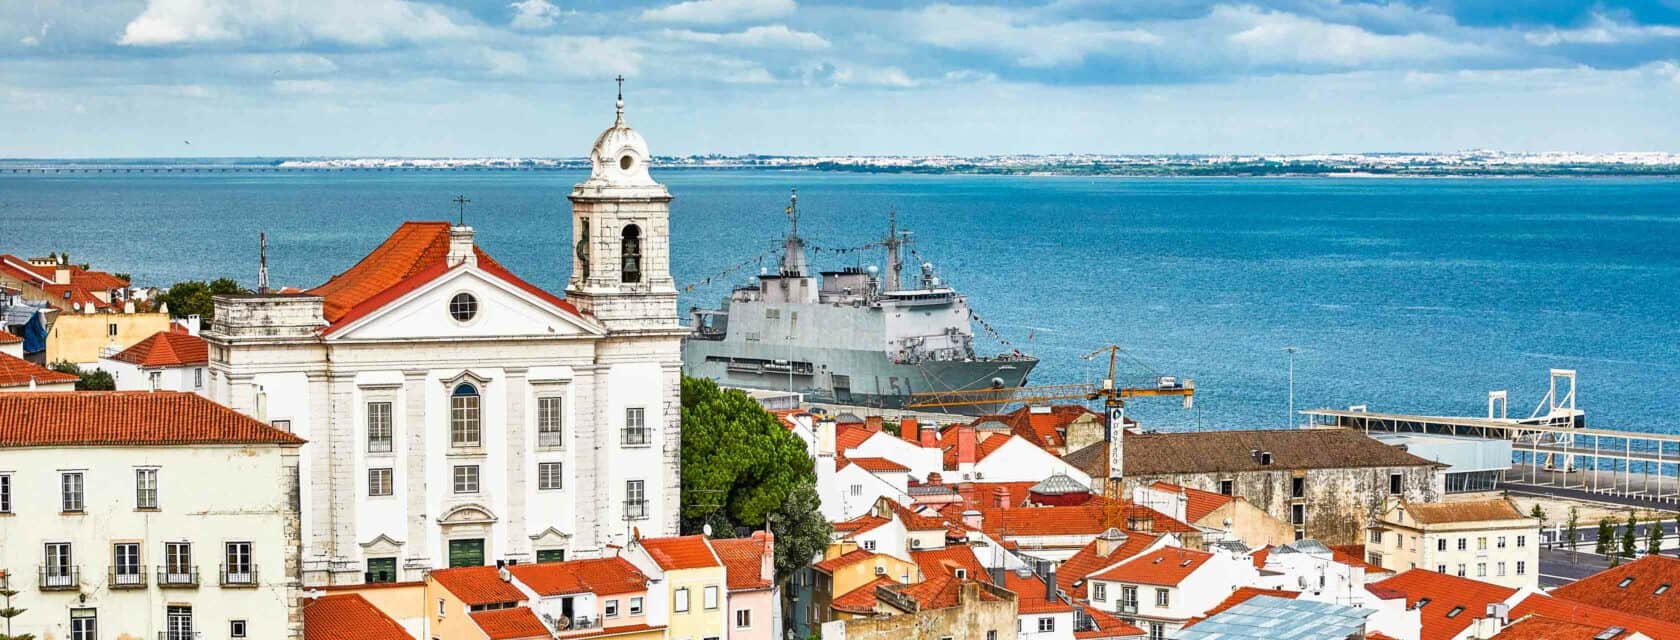 A view of the city of Lisbon facing out over the ocean.